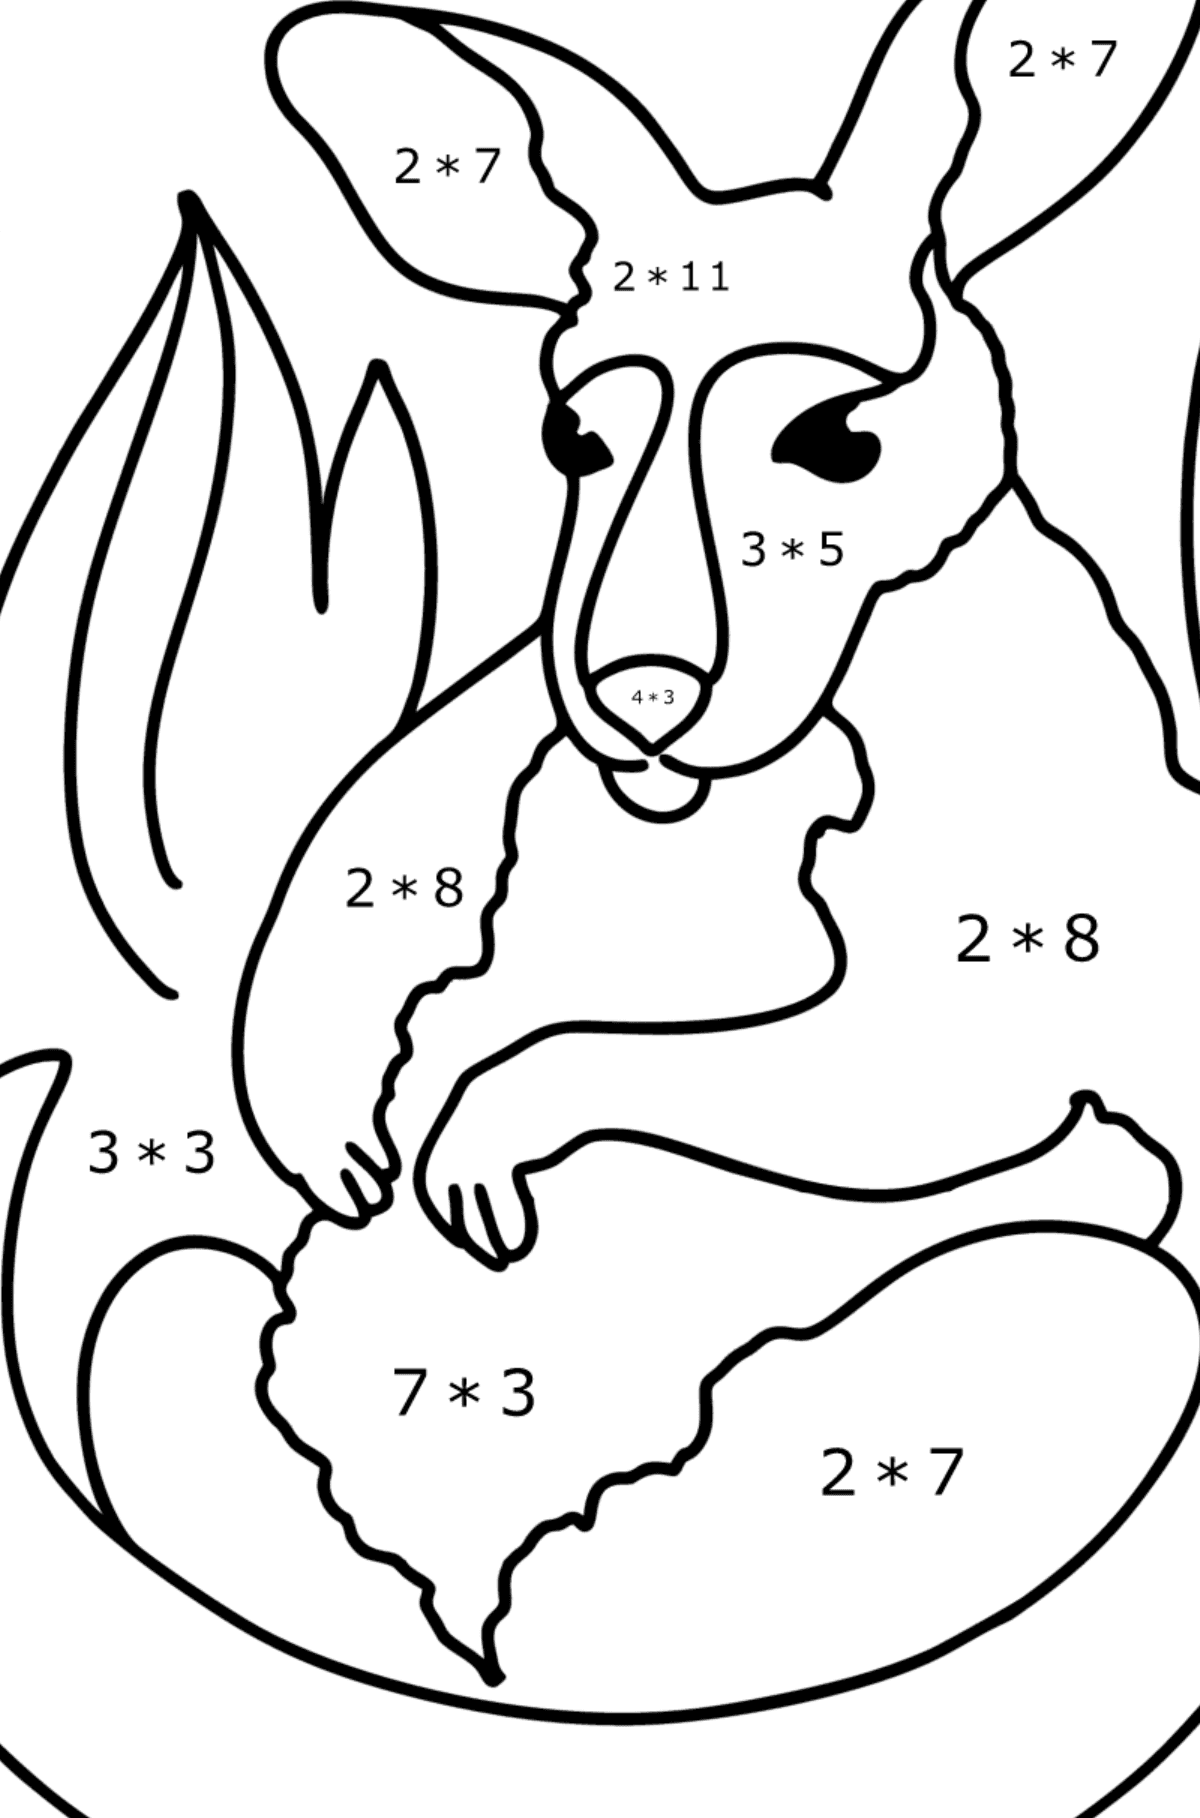 Coloring page - Adorable baby kangaroo - Math Coloring - Multiplication for Kids